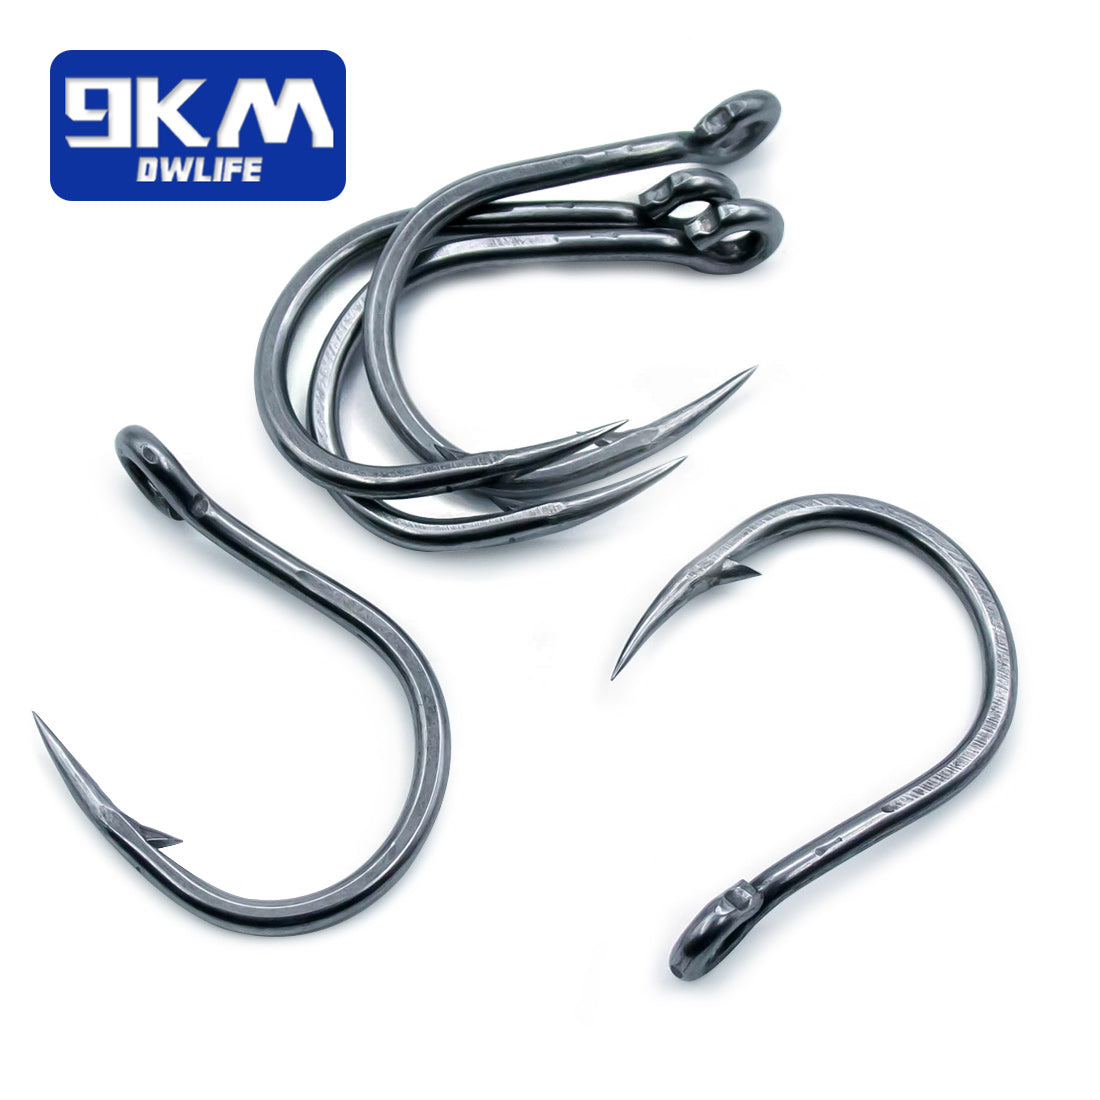  Fishing Tackle Hooks Lures 9 PCS. Single Hook Assist, 100 LBS.  Test, 5/0,4/0,3/0 Stainless S. 3 EA. Black : Sports & Outdoors